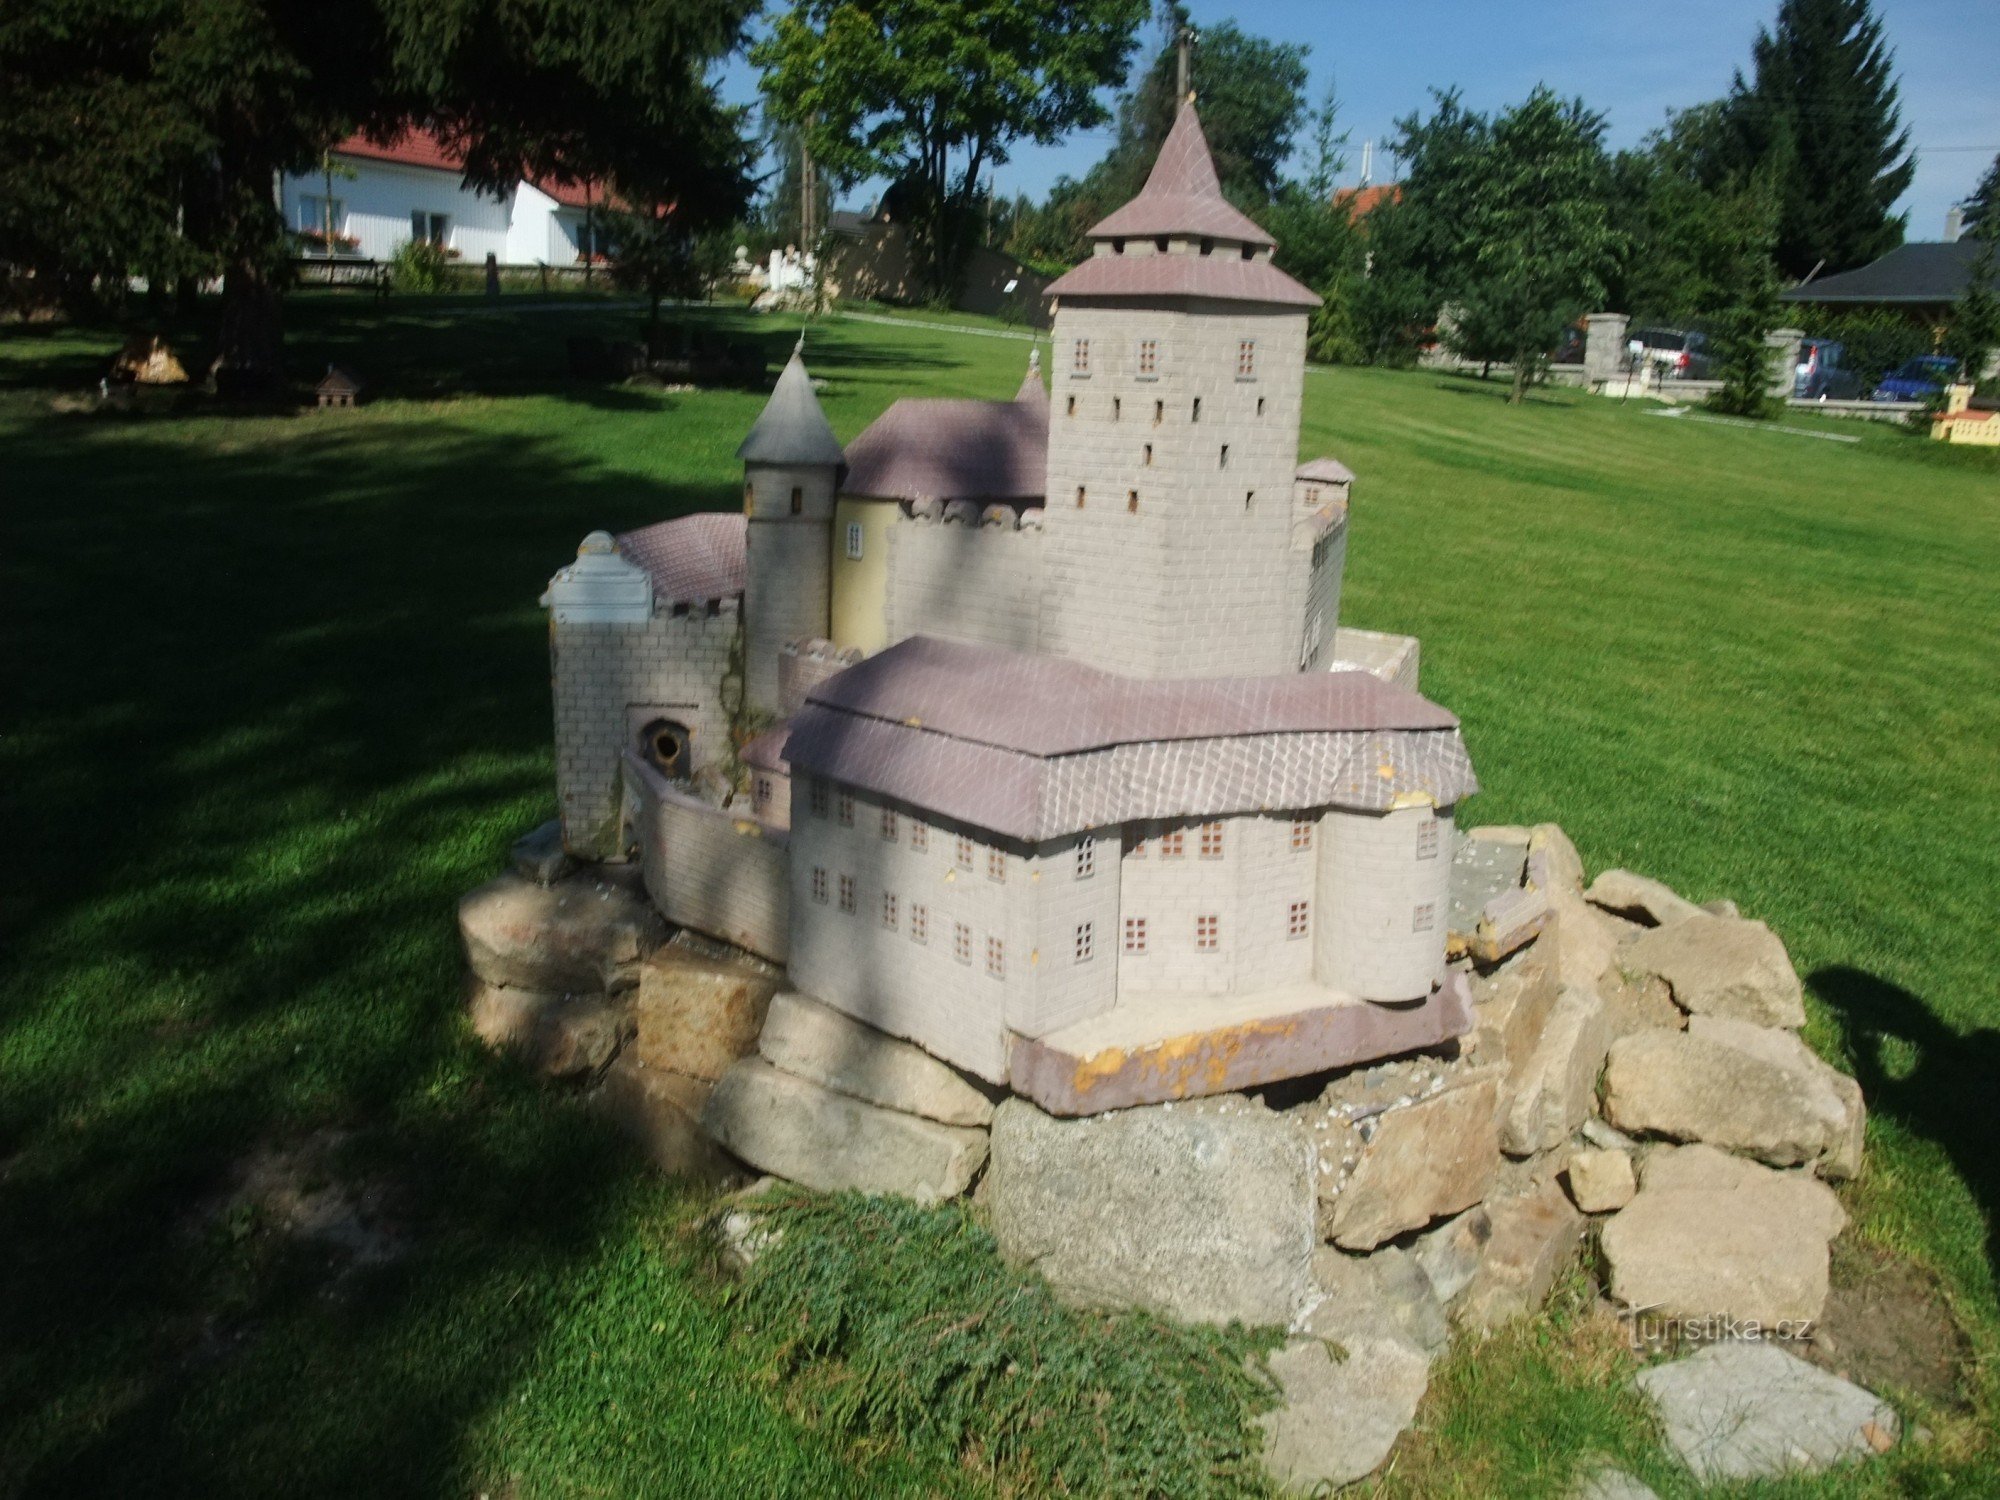 Bertchtold Castle - commercial entertainment for the whole family